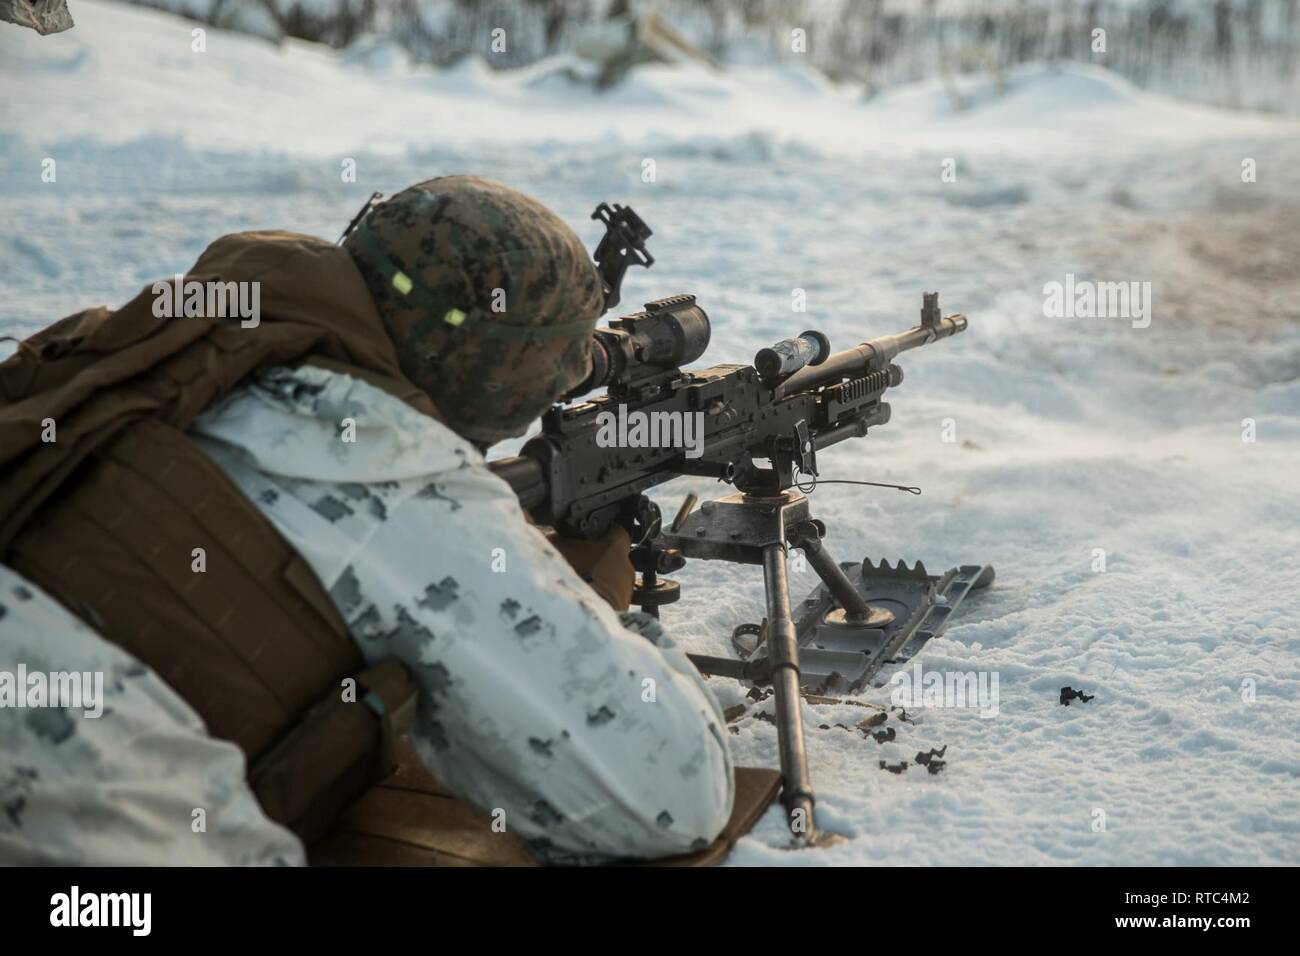 A U.S. Marine with Marine Rotational Force-Europe 19.1, Marine Forces Europe and Africa, fires a M240B machine gun in Setermoen, Norway, Feb. 8, 2019. This training increased MRF-E Marines’ proficiency at cold-weather and mountain-warfare tactical operations in cold-weather environments. Stock Photo